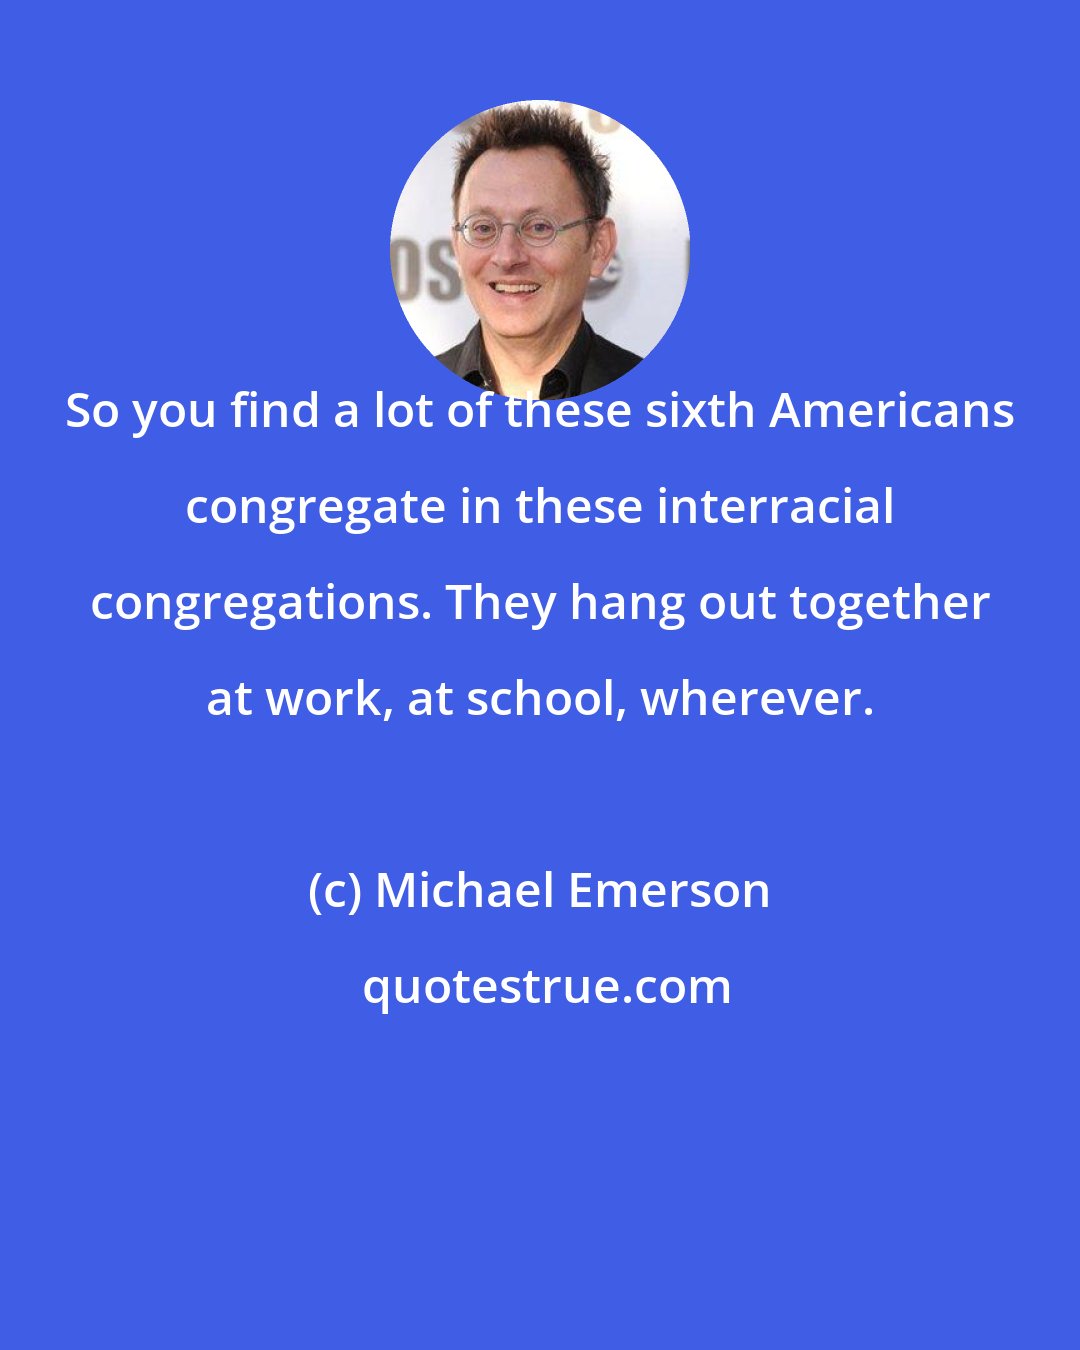 Michael Emerson: So you find a lot of these sixth Americans congregate in these interracial congregations. They hang out together at work, at school, wherever.